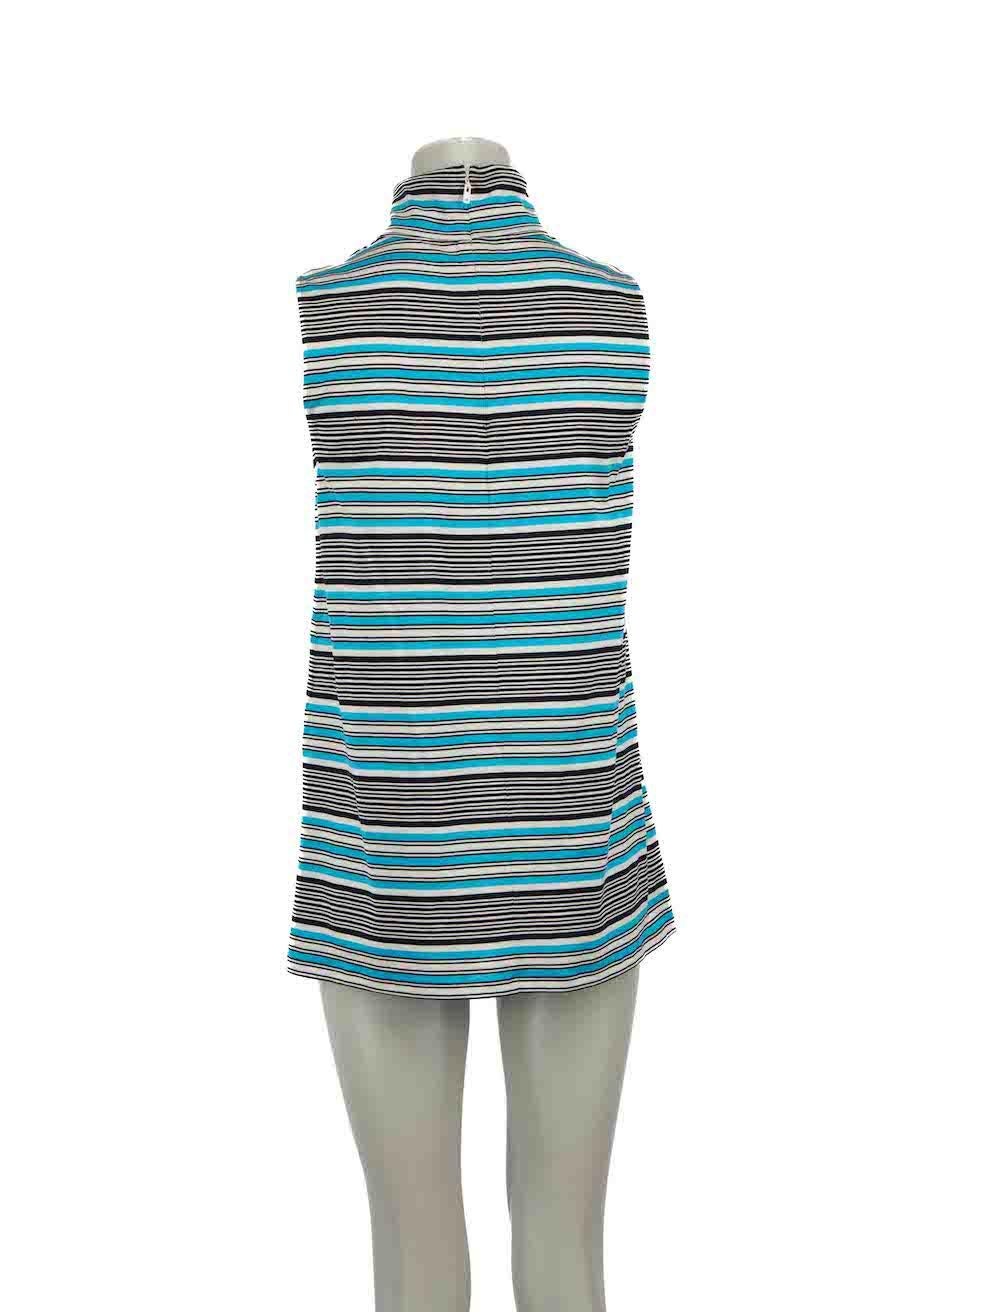 Prada Blue Striped Sleeveless Turtleneck Top Size S In Excellent Condition For Sale In London, GB